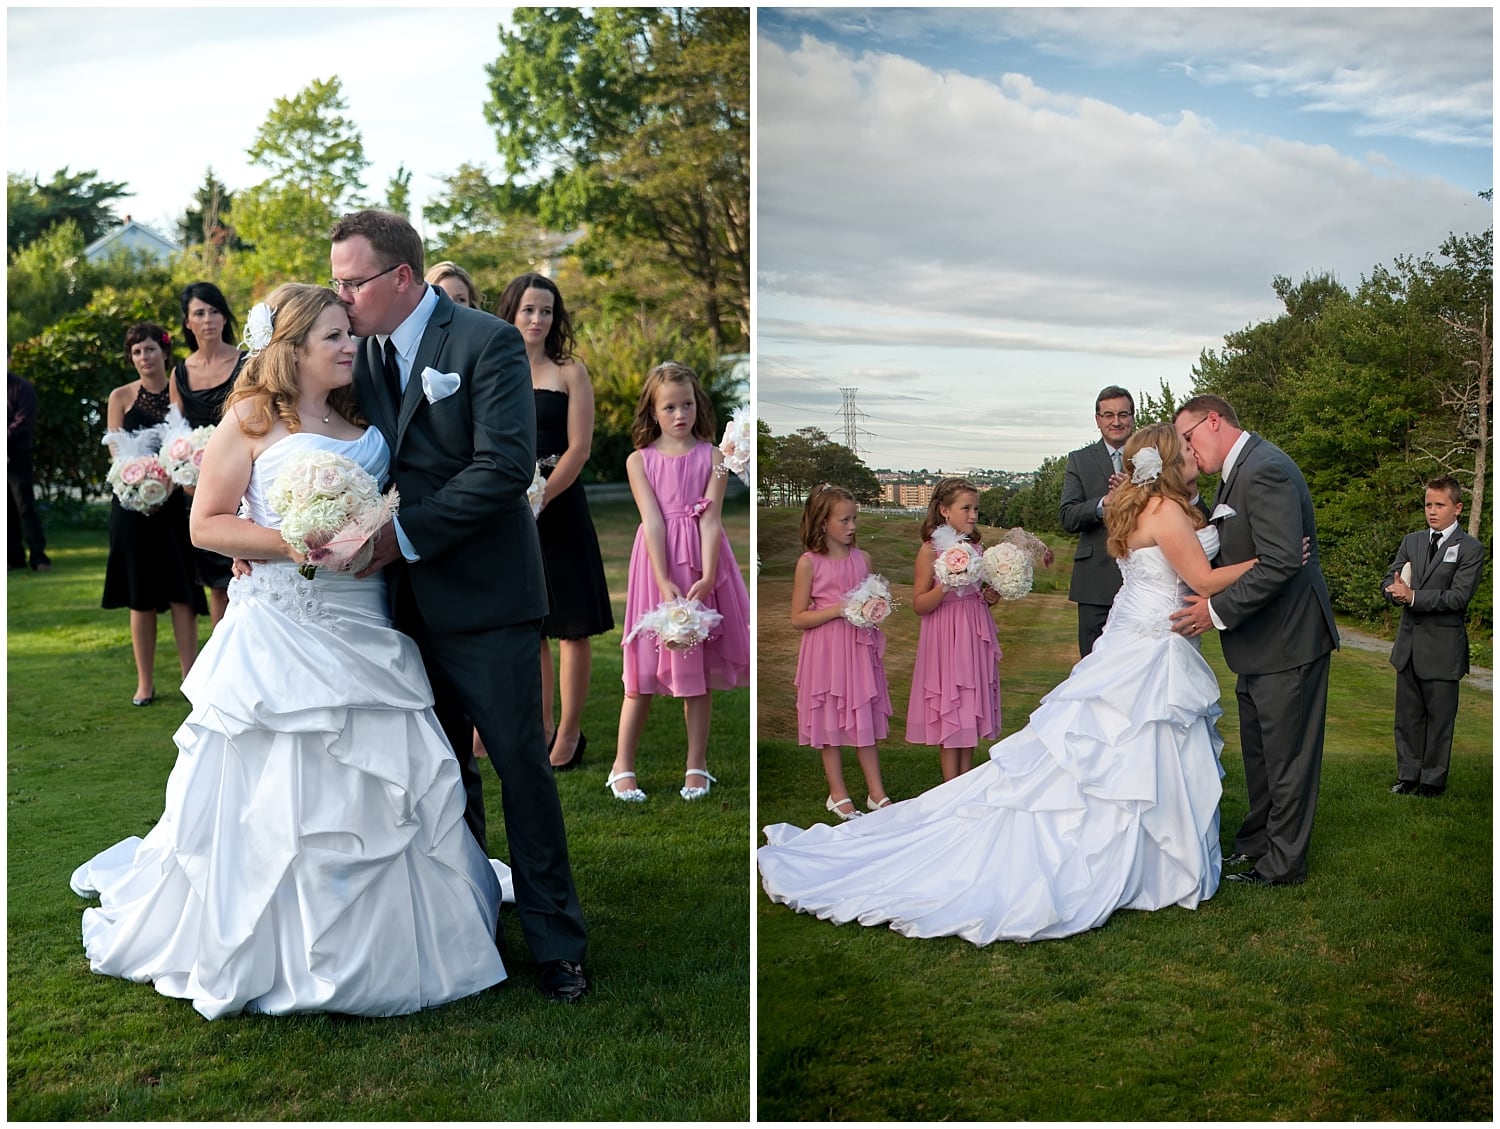 The groom and bride have their first kiss during their wedding ceremony at the Ashburn Golf Club in Halifax Nova Scotia.